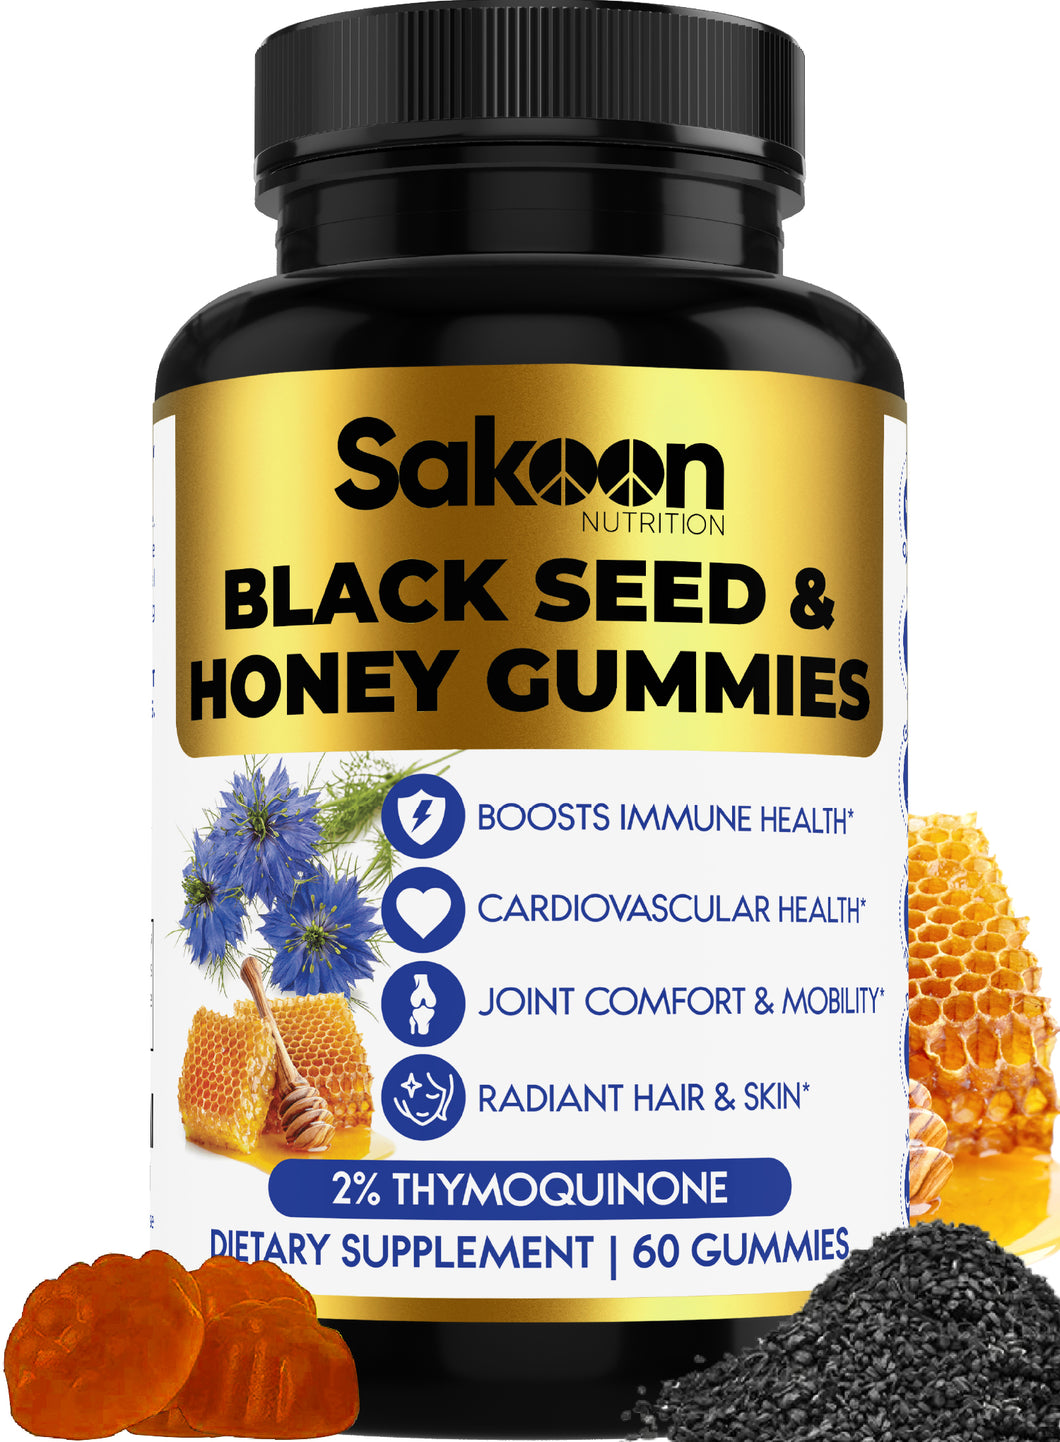 Black Seed and honey Gummies product